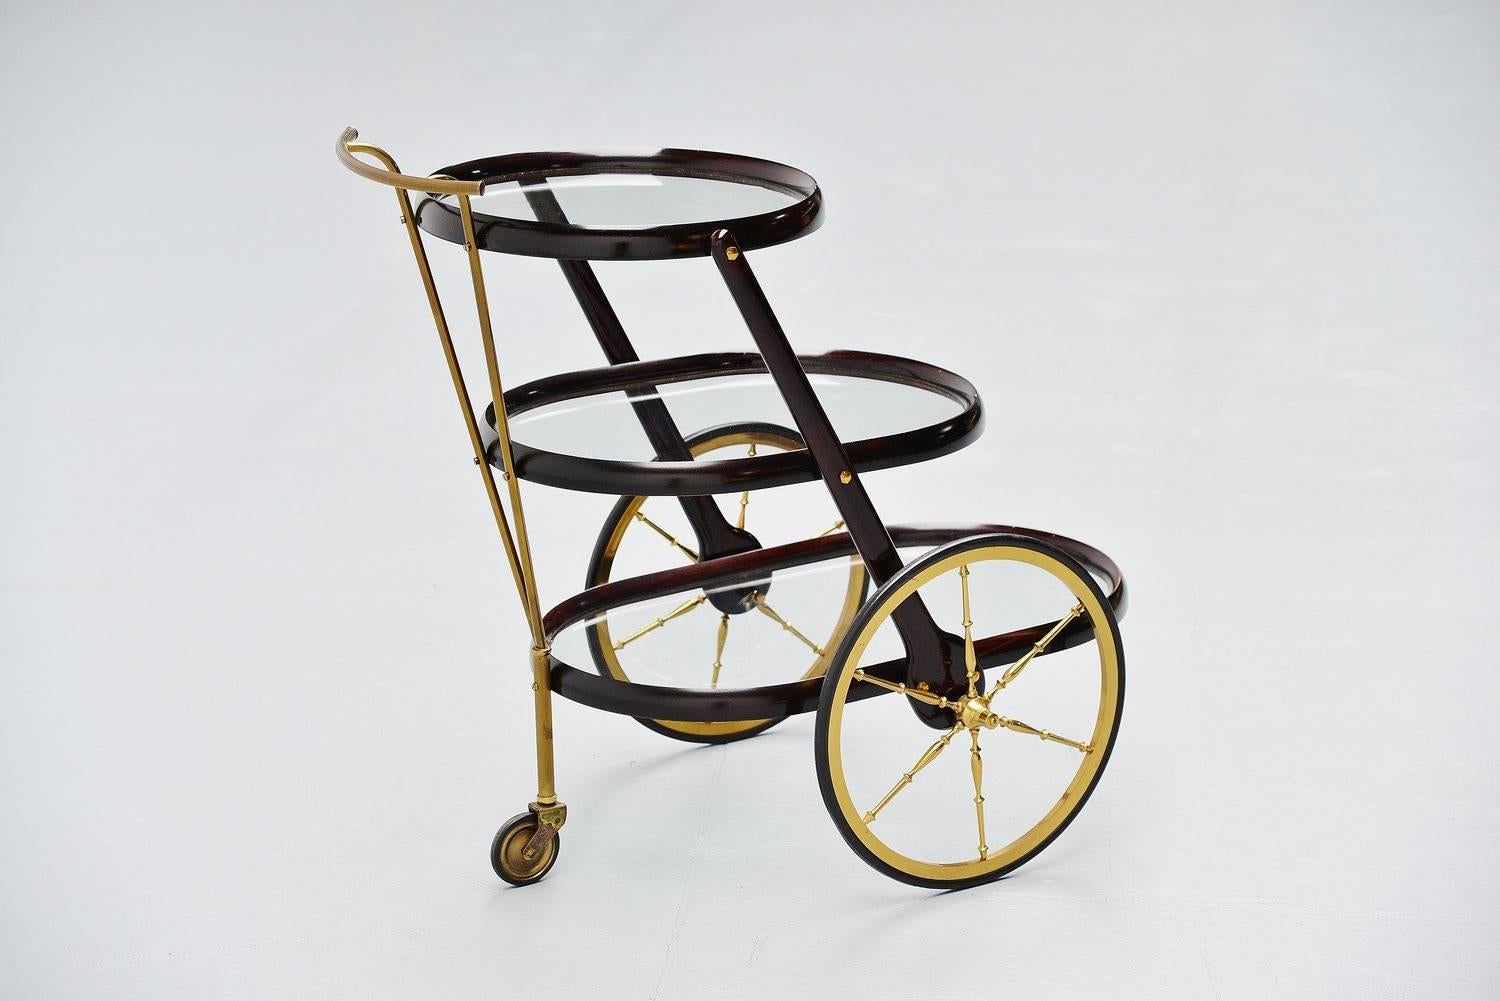 Fantastic shaped bar cart designed by Cesare Lacca, Italy 1950. Tri level bar cart made of stained mahogany wood and brass details. The cart has glass tops and is in very good original condotion. Wheels work perfectly too. Very nice typical Italian